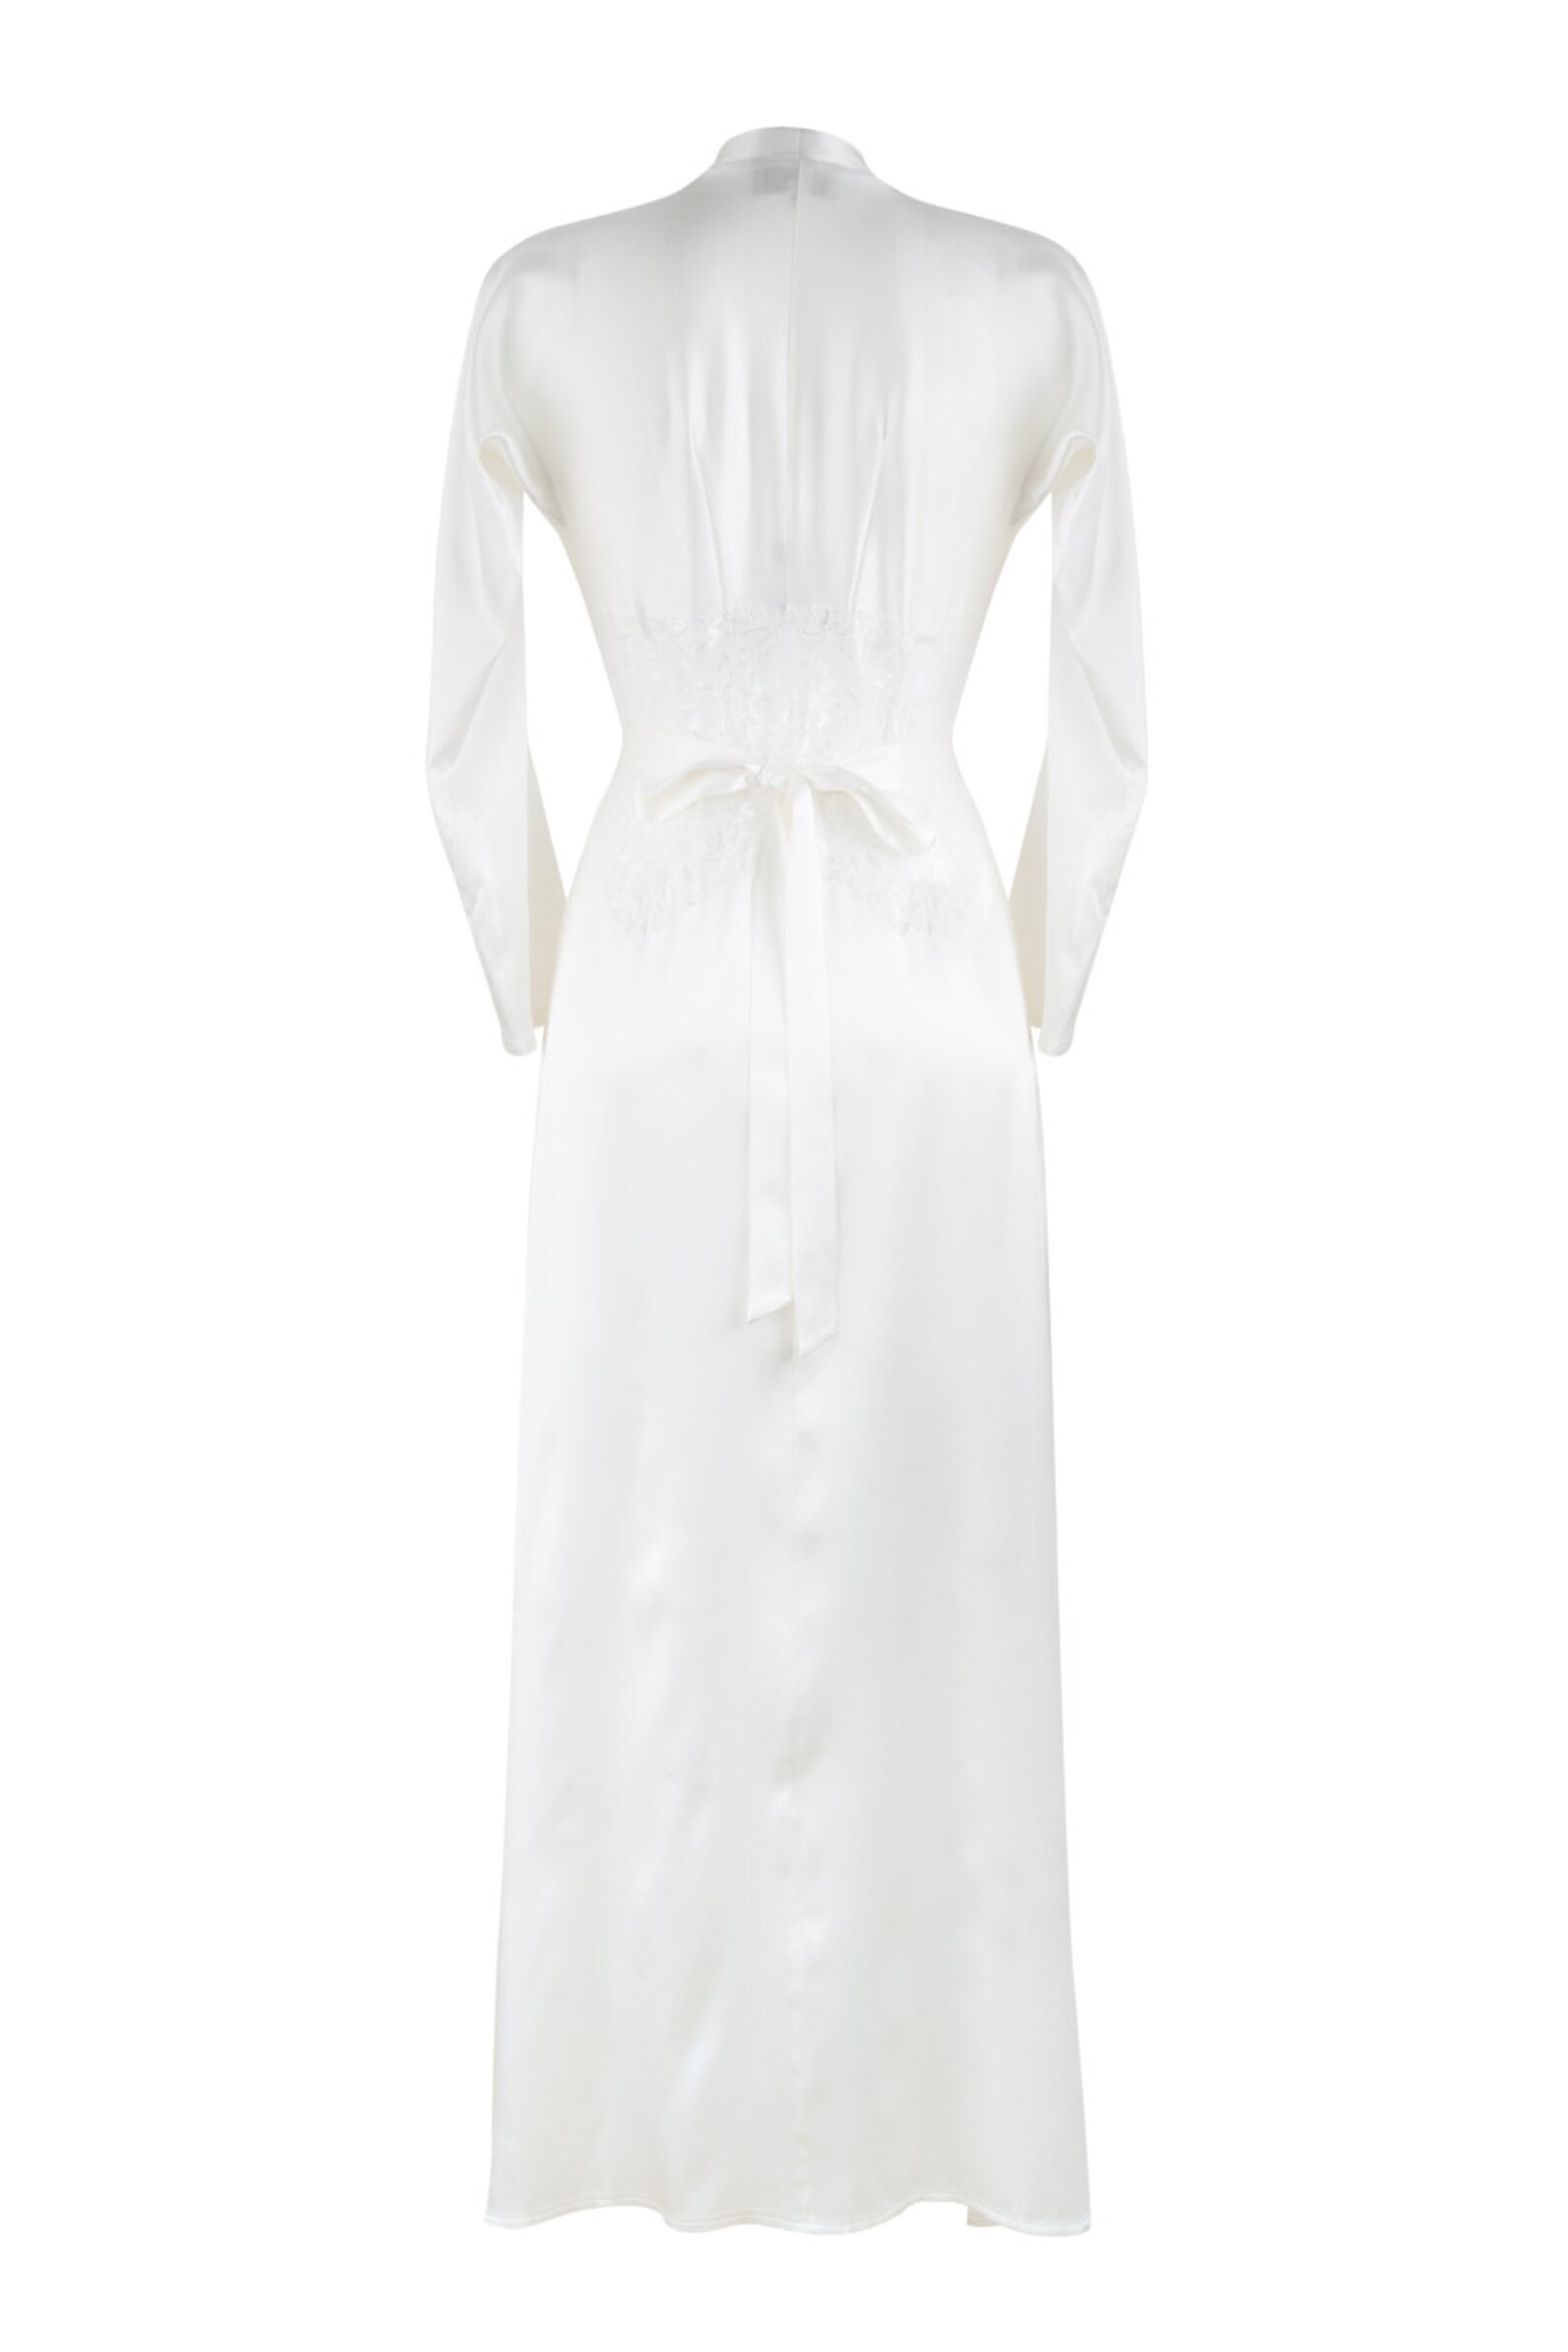 Bridal Robe Ivory Silk Dressing Gown Inspired by Marilyn - Etsy